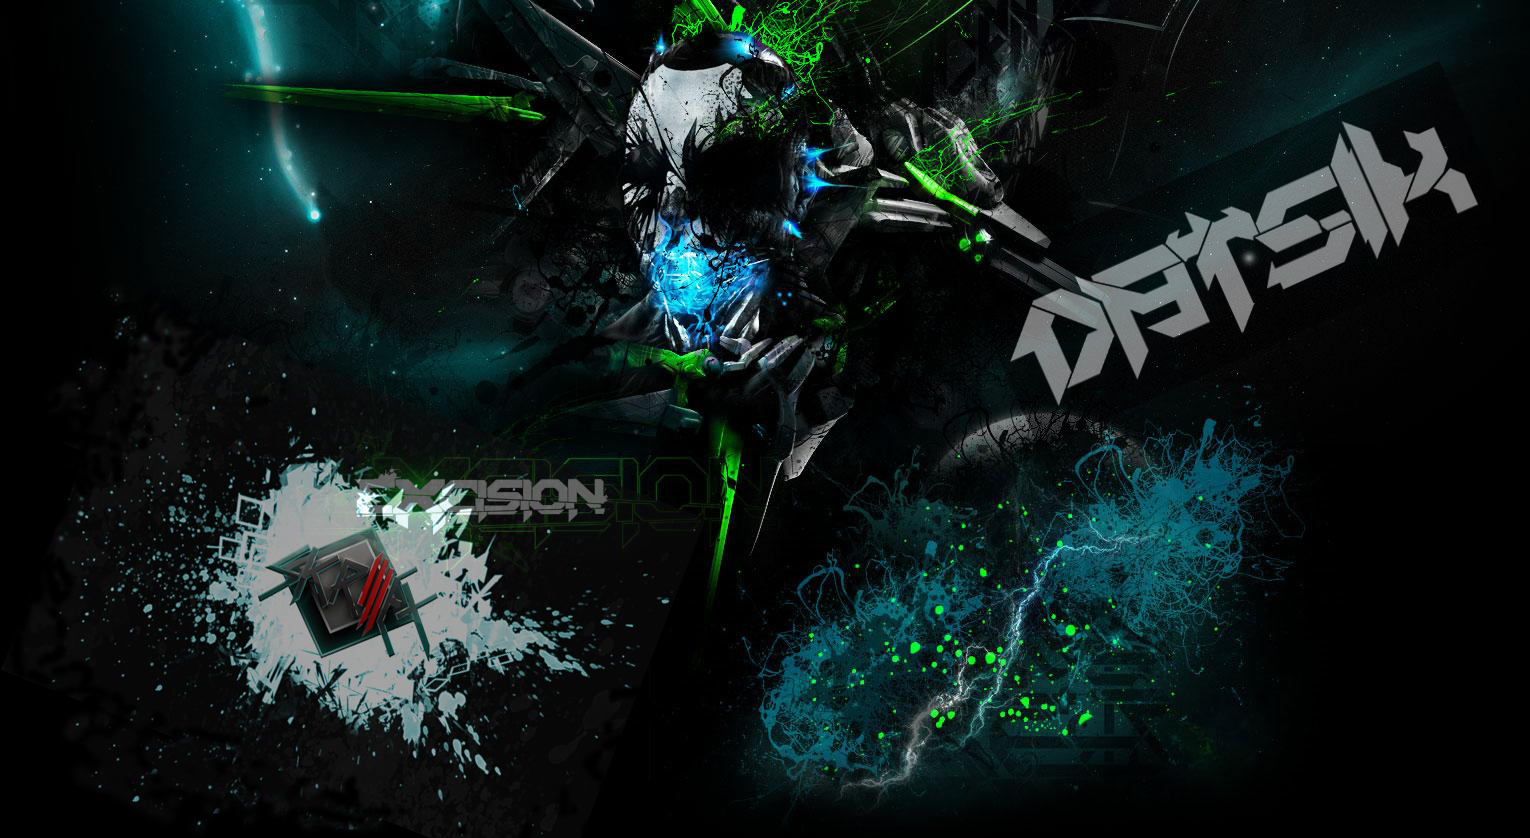 DeviantArt: More Like Excition-Datsik-Skrillex wallp by Cyb3rdr4g0nGR